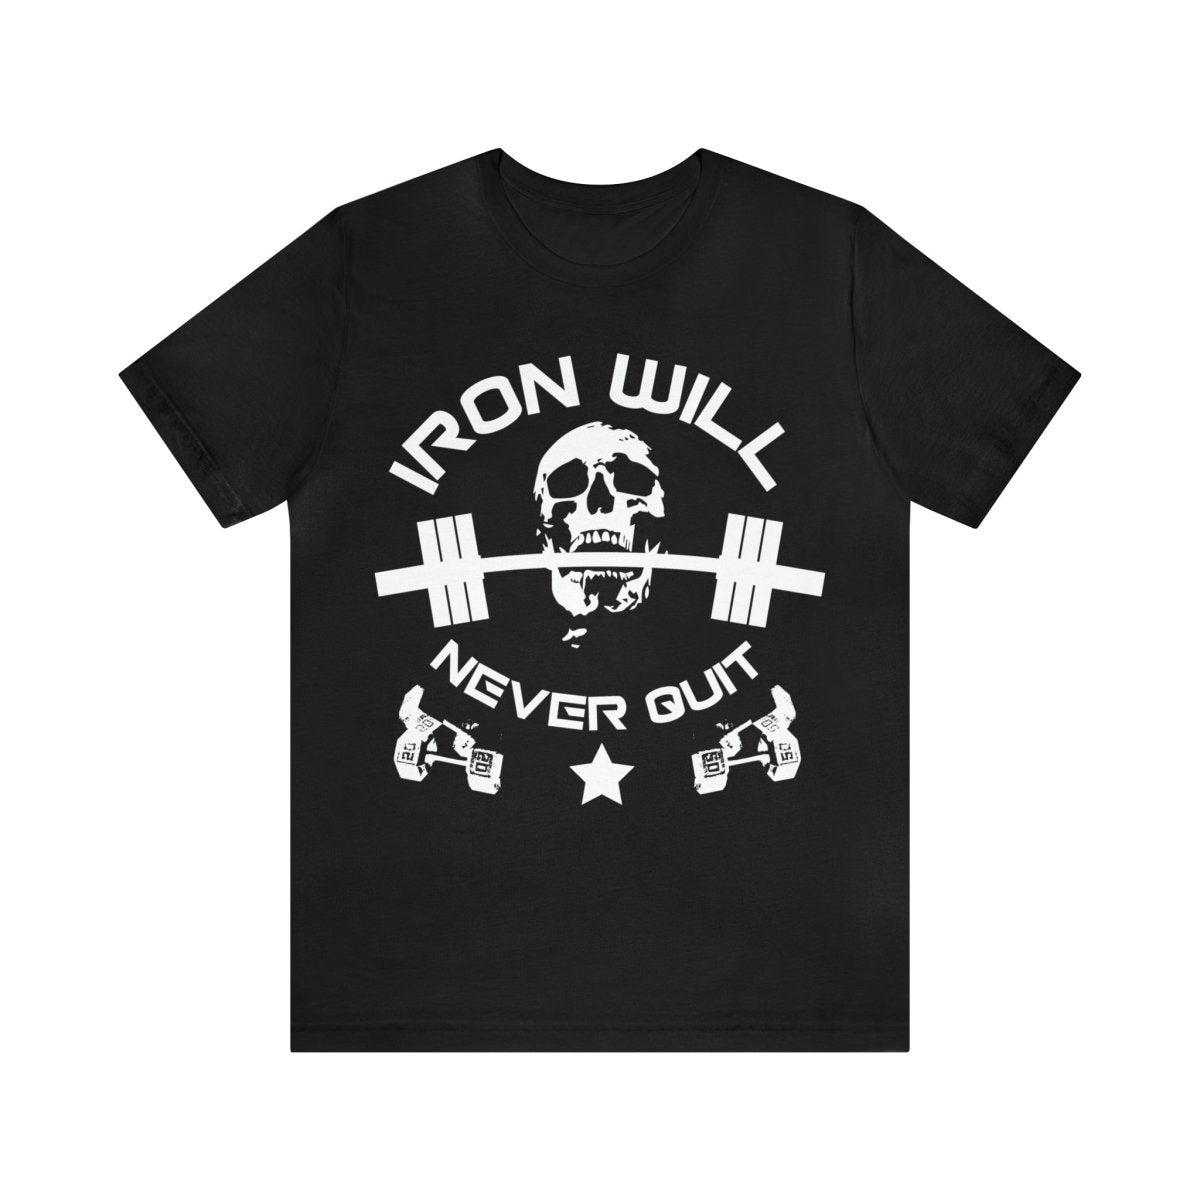 Iron Will Never Quit Premium T-Shirt, Ironslinger, Weightlifting, Champion, Athlete, Powerlifting, Gym, Strong